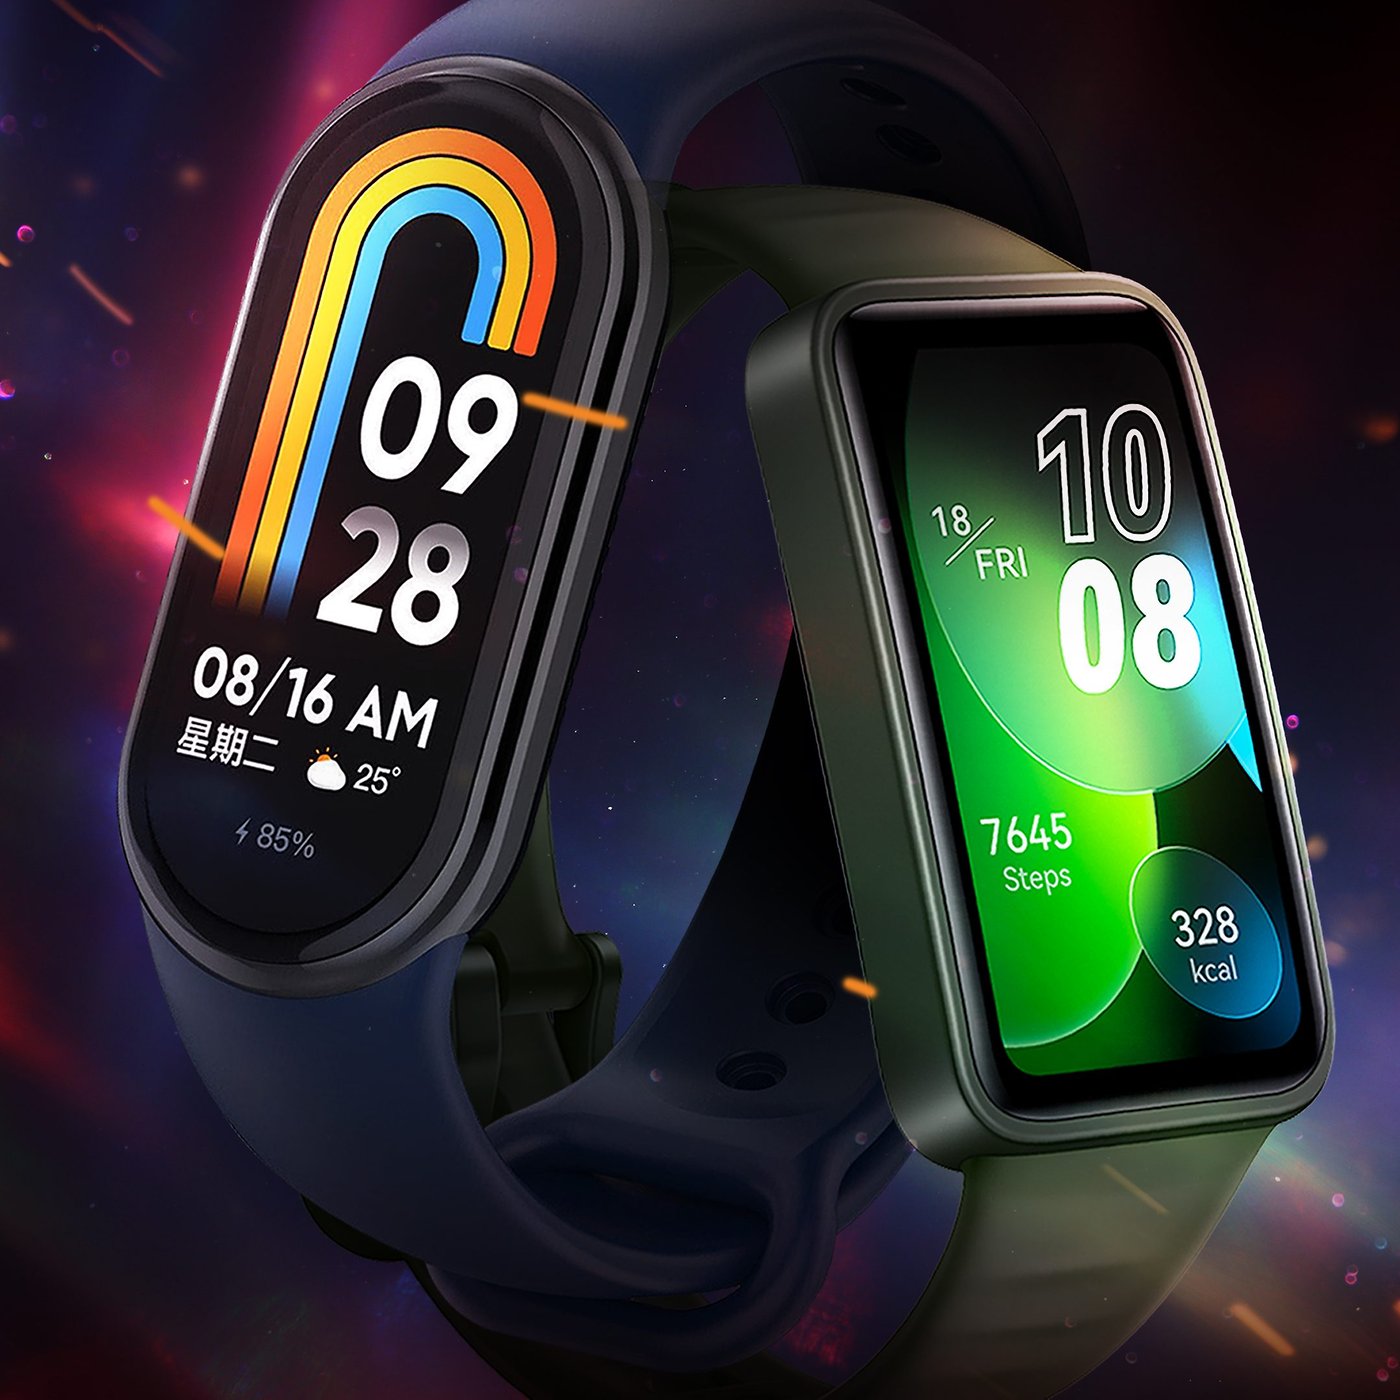 Xiaomi Smart Band 8 vs Huawei Band 8: Which Reigns Supreme?